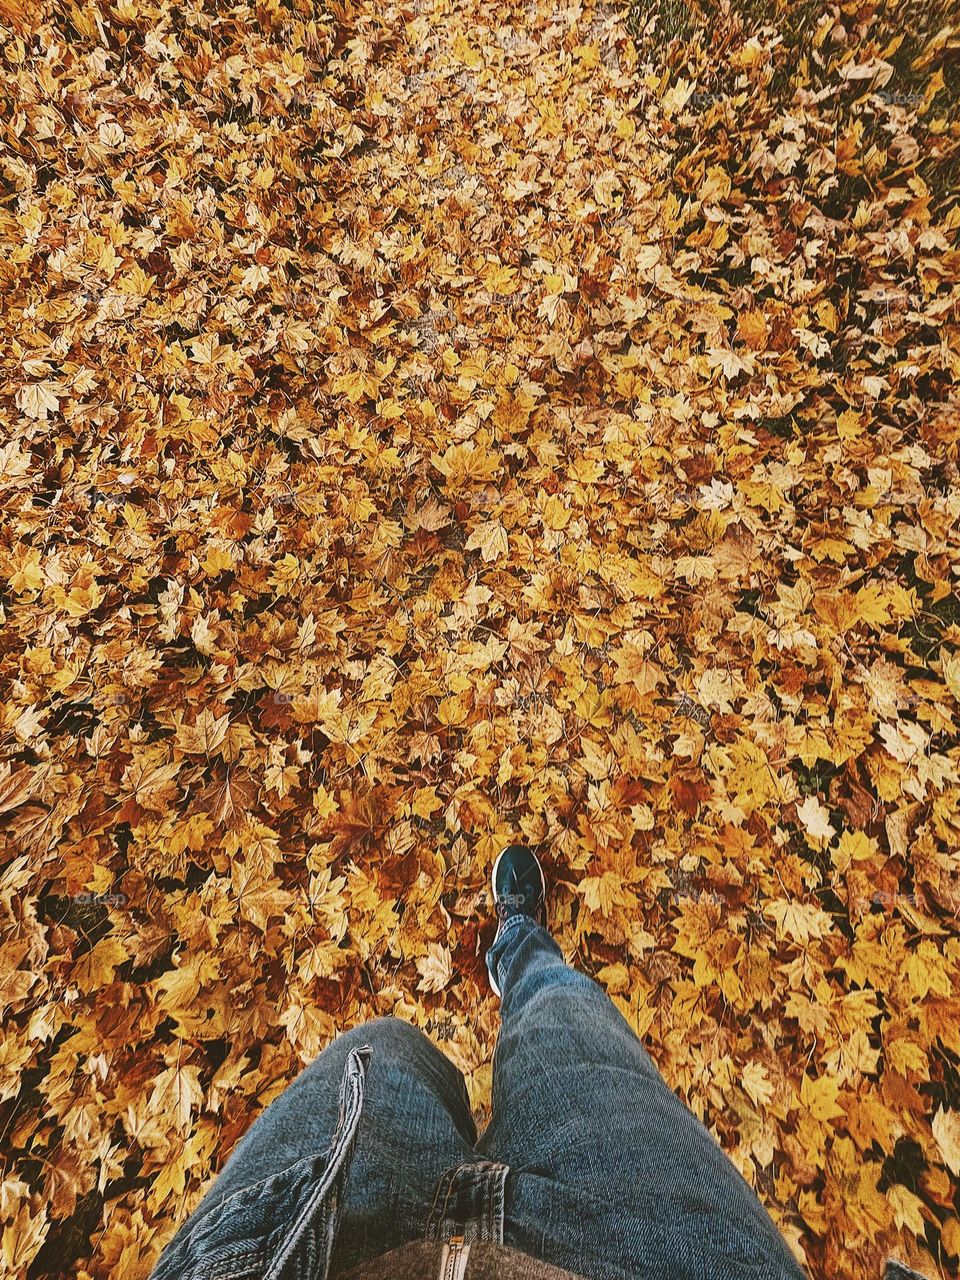 Walking through the crunchy leaves of fall, walking in the fall time, leaf covered path, leaves are falling in the Midwest, autumn in the Midwest, colorful fall time 